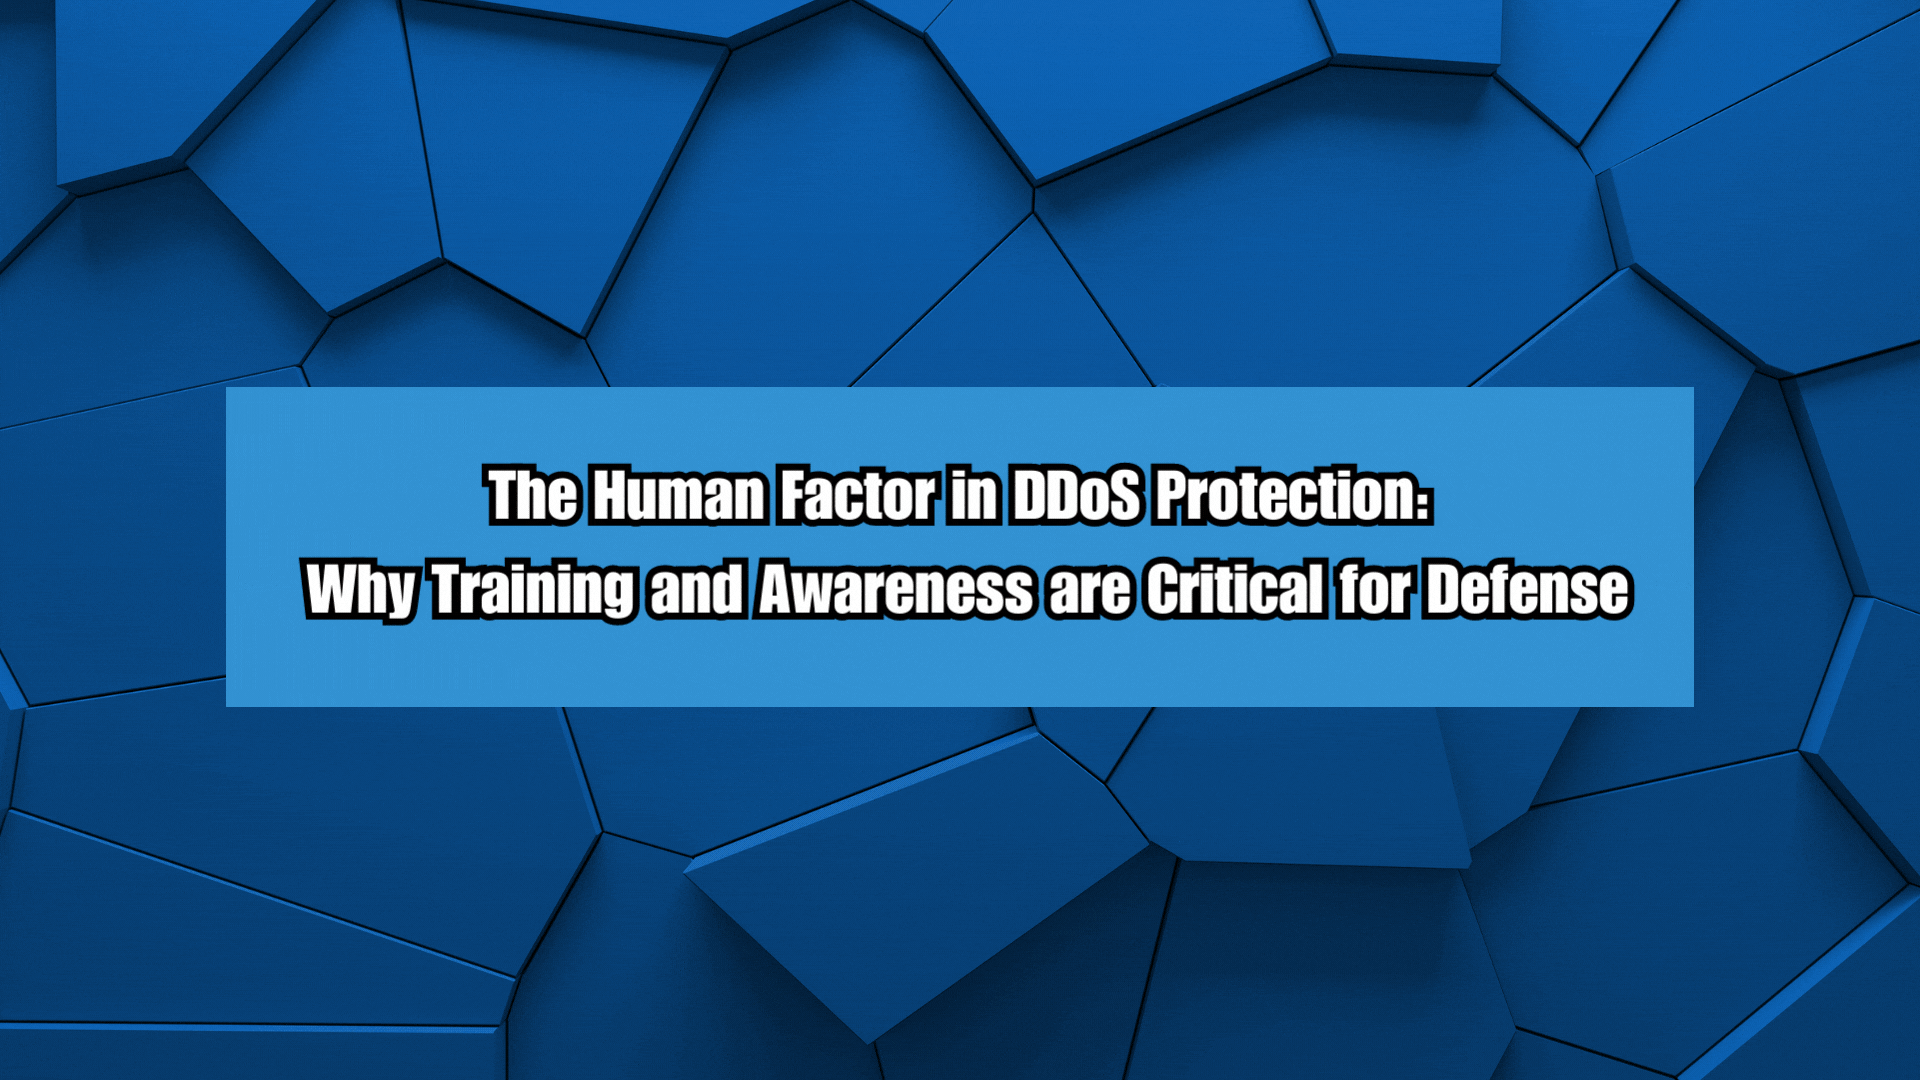 The Human Factor in DDoS Protection Why Training and Awareness are Critical for Defense